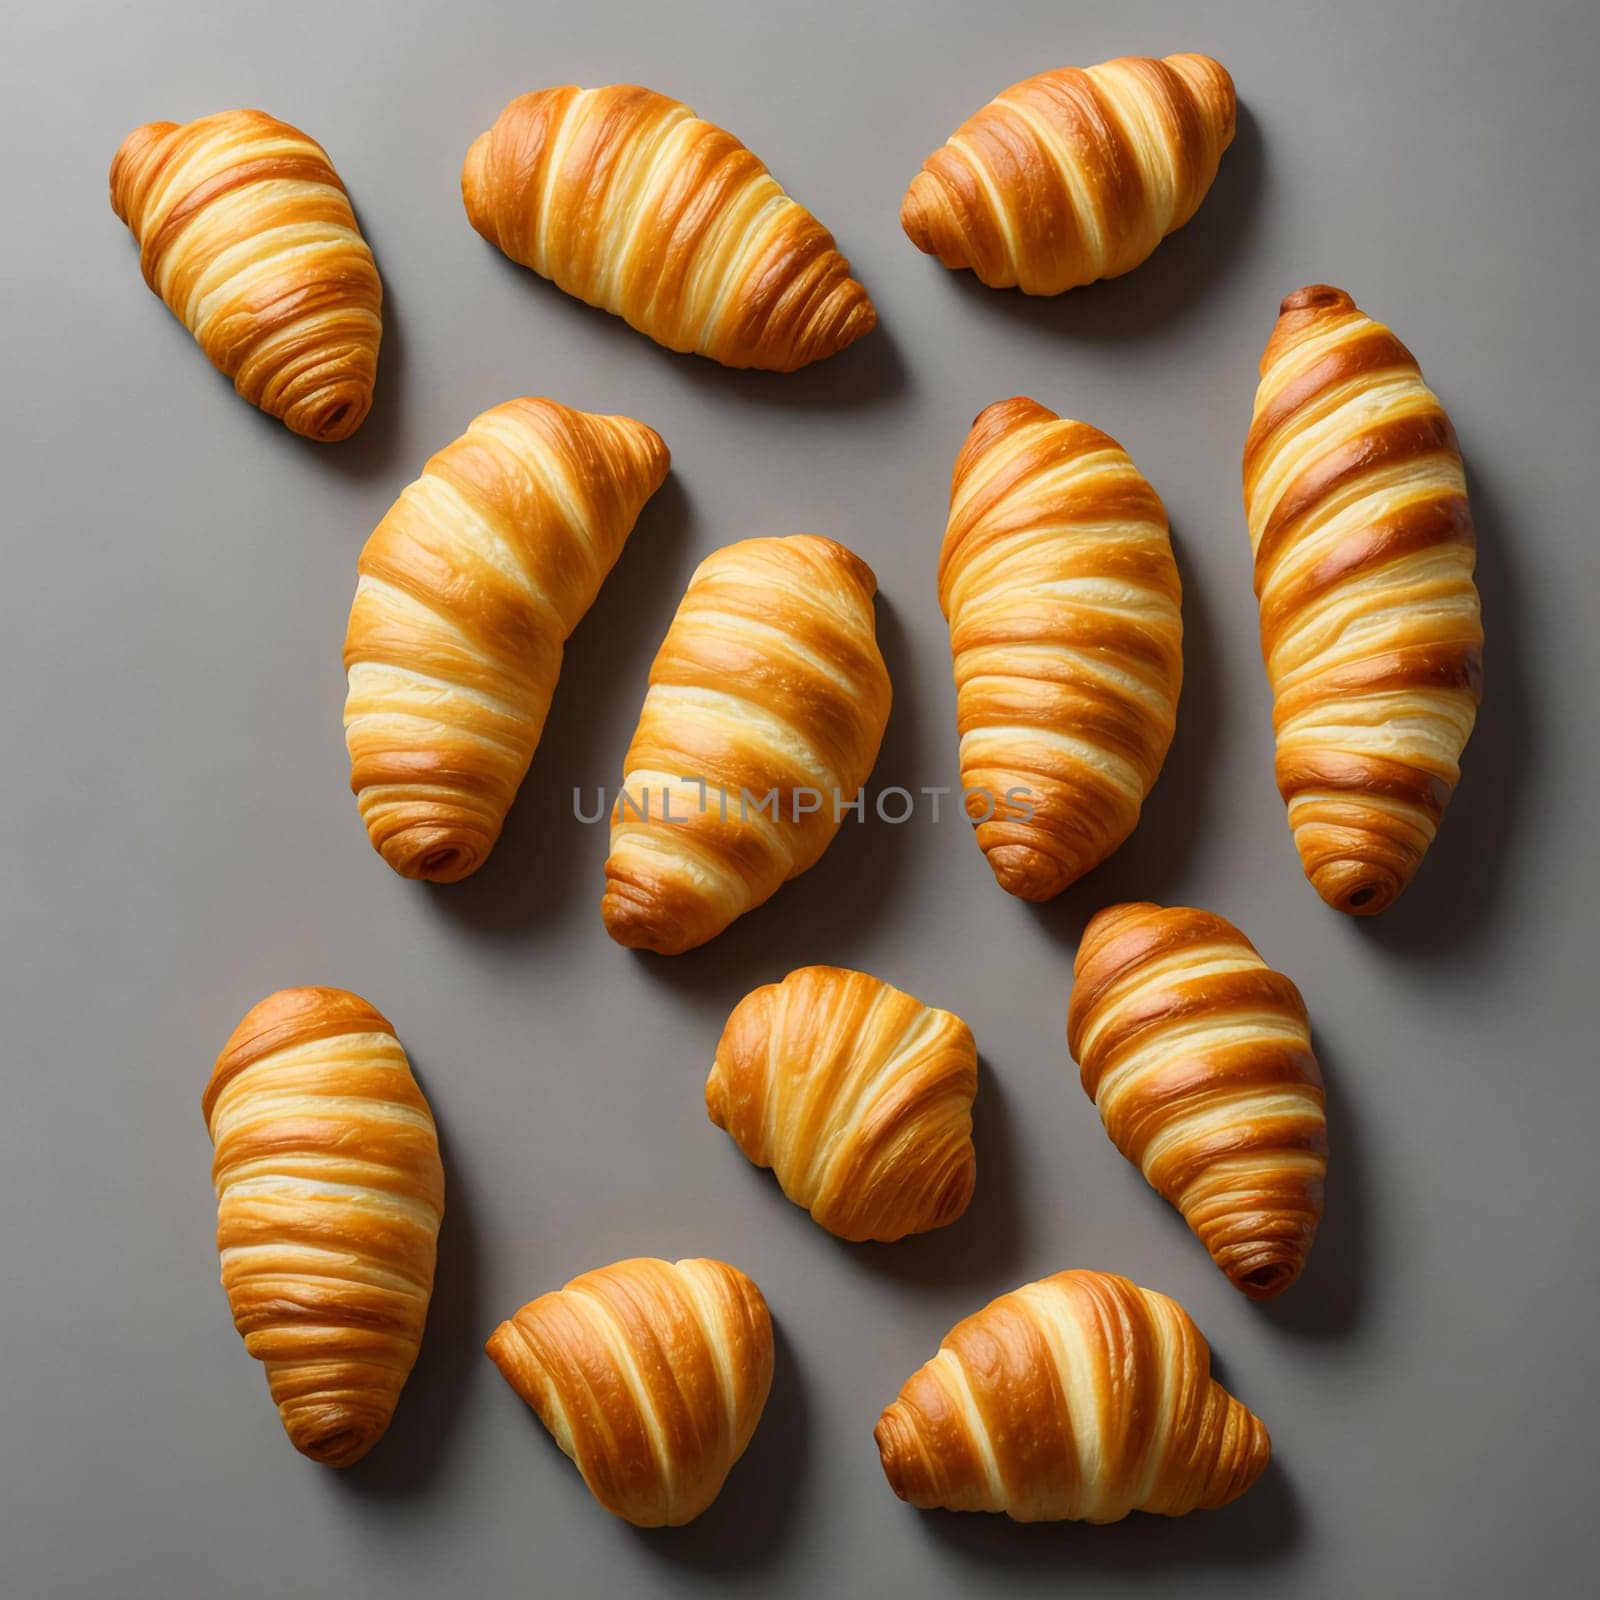 freshly baked croissants on a gray background